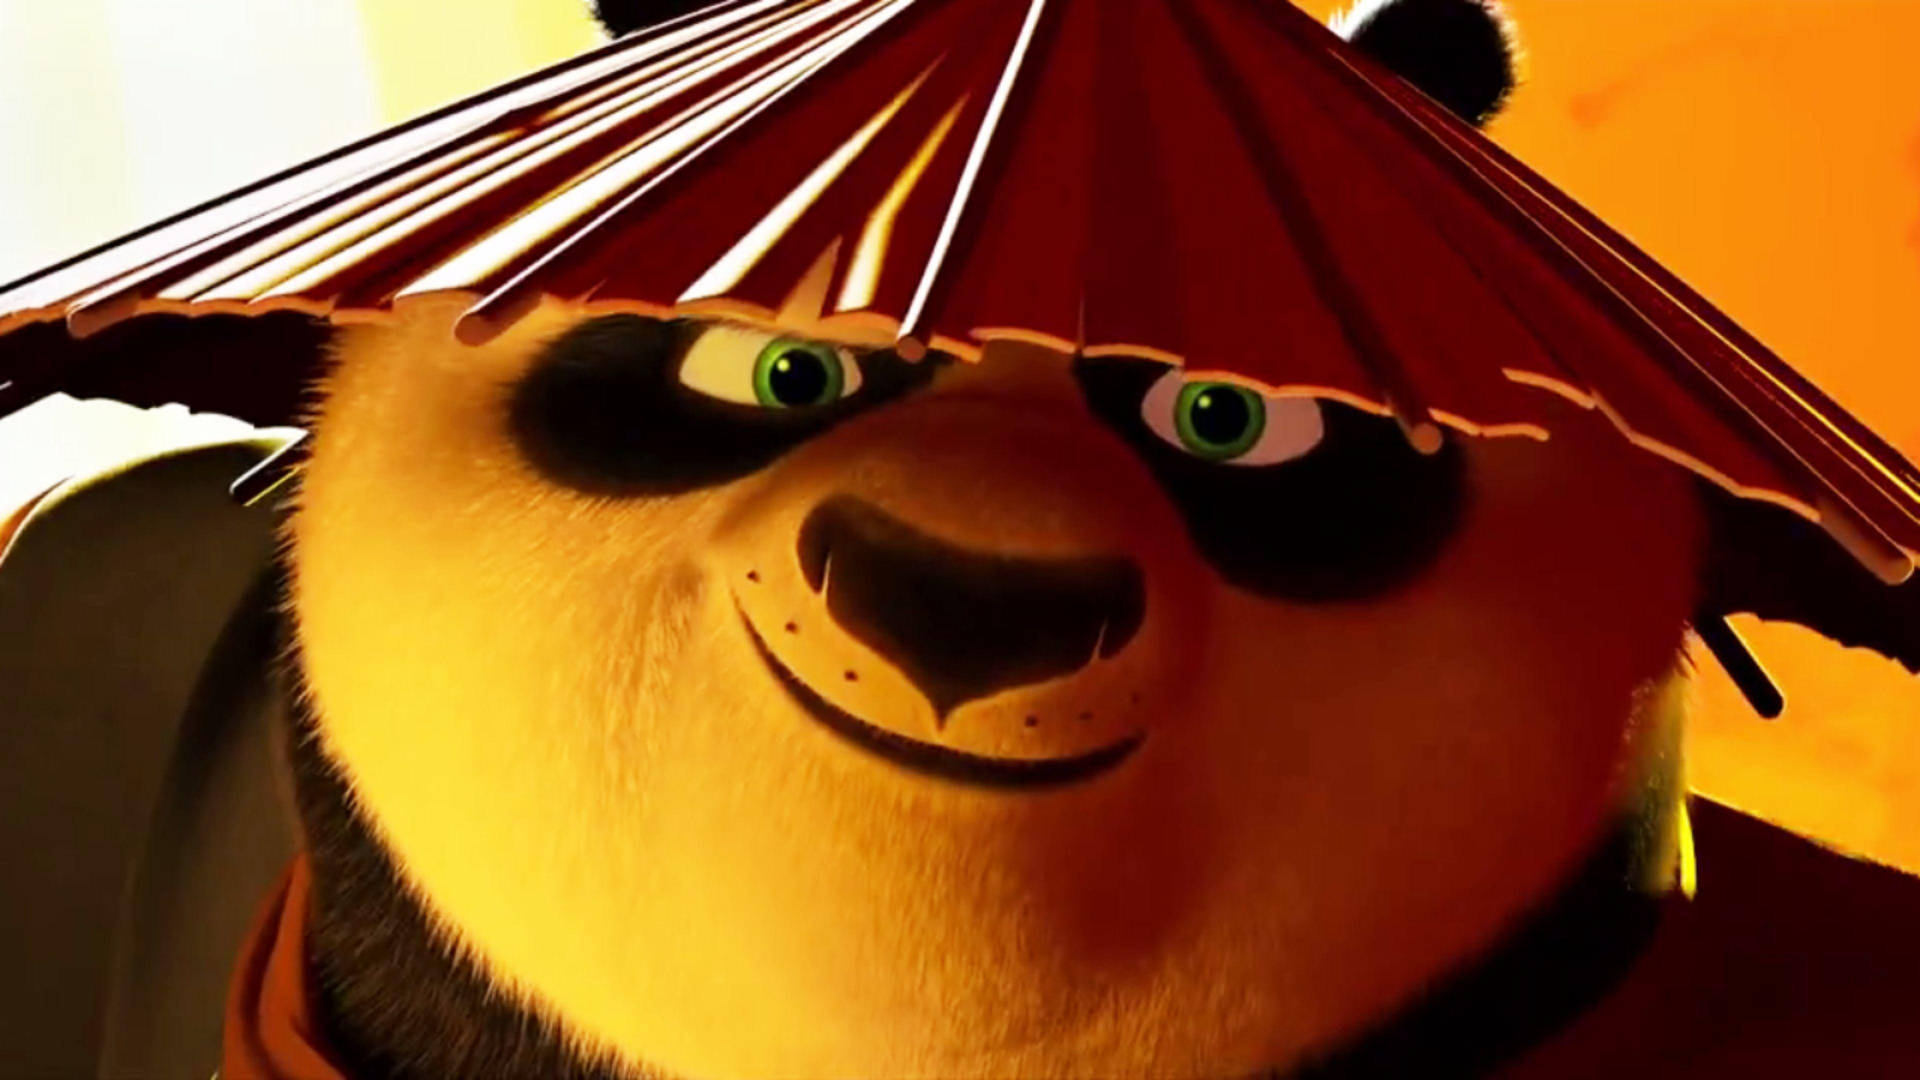 Caption: Smiling Kung Fu Panda Donning A Hat